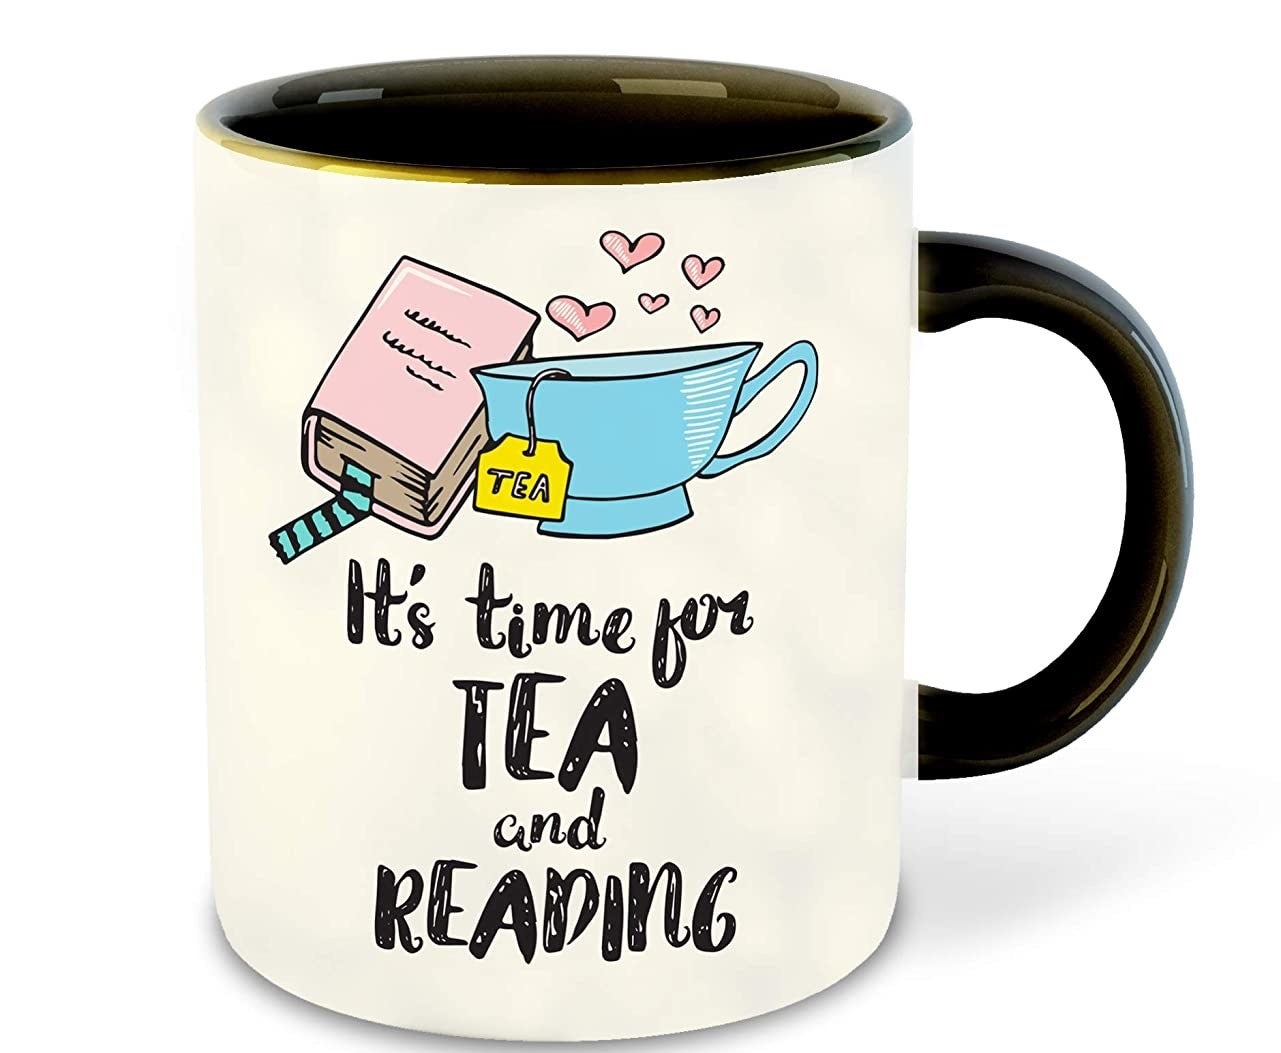 A mug that says &quot;It&#x27;s time for tea and reading&quot; on its side.